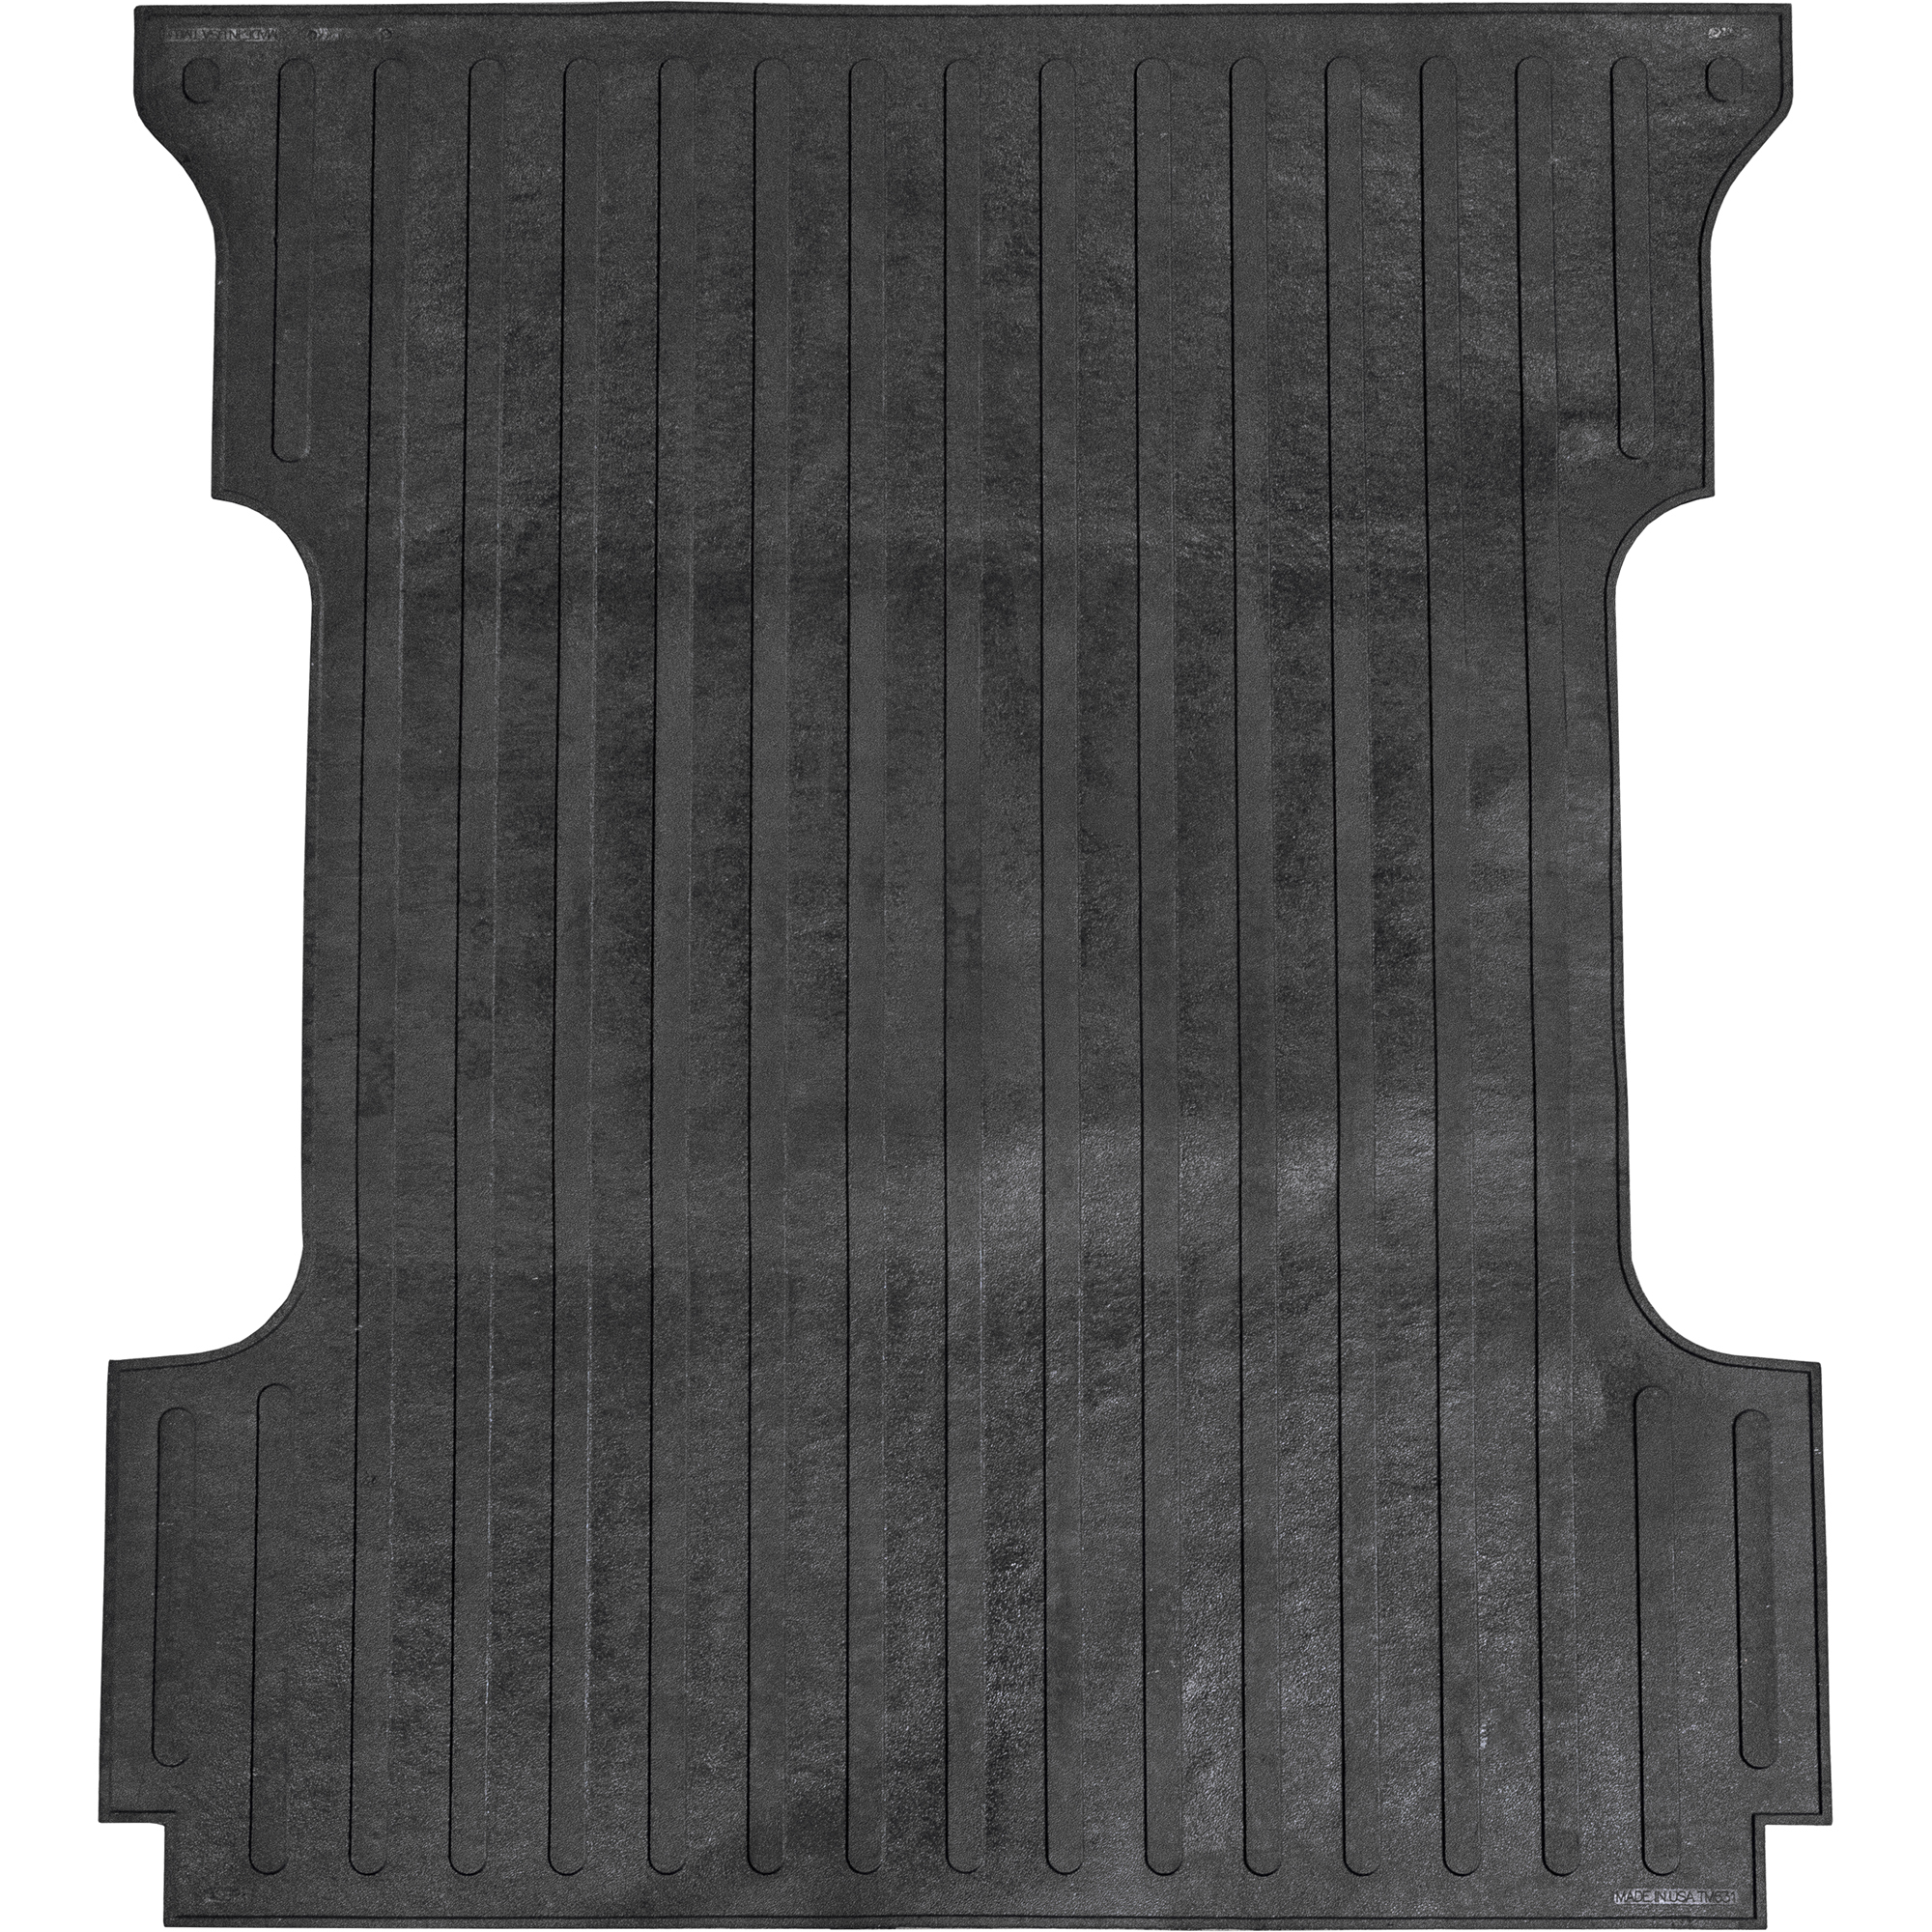 Boomerang Rubber, Ford F-150 Year 2004-2014 , Bed Mat, Long Bed, 8ft. Long, Primary Color Black, Model TM520BAGGED